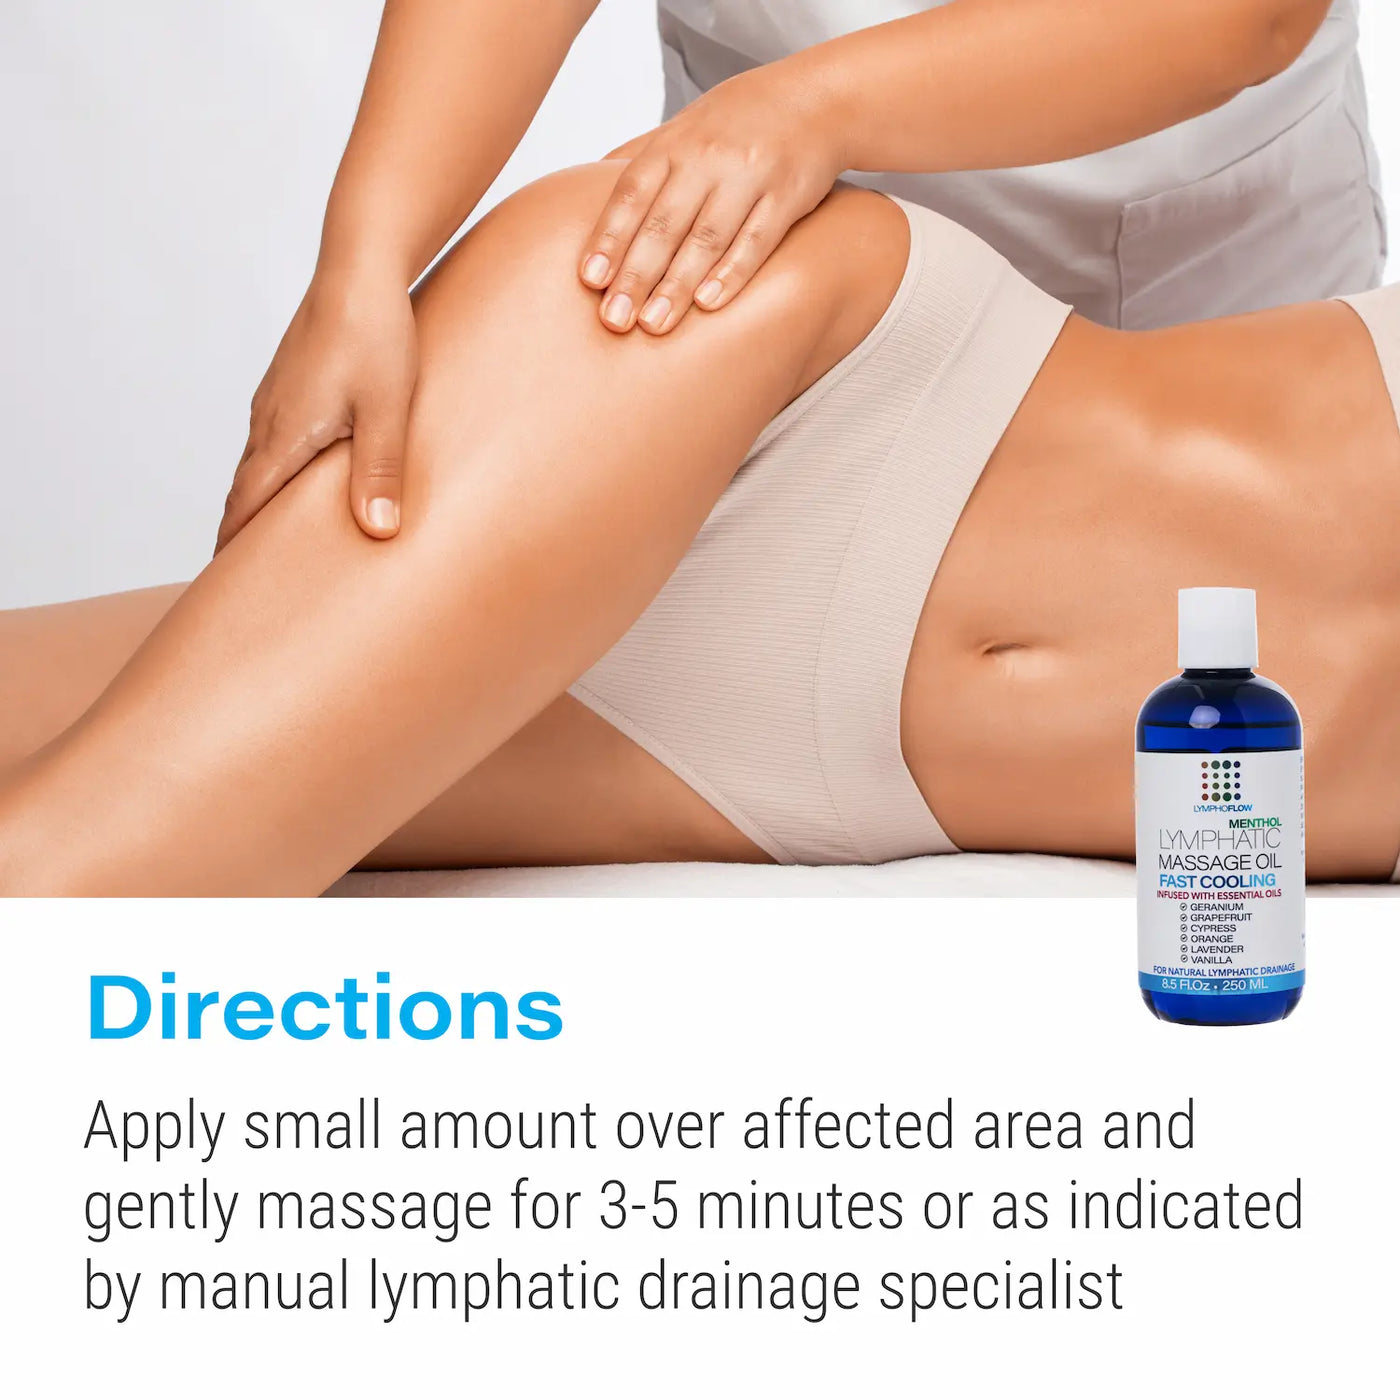 Lymphatic Massage Oil with Cooling Menthol